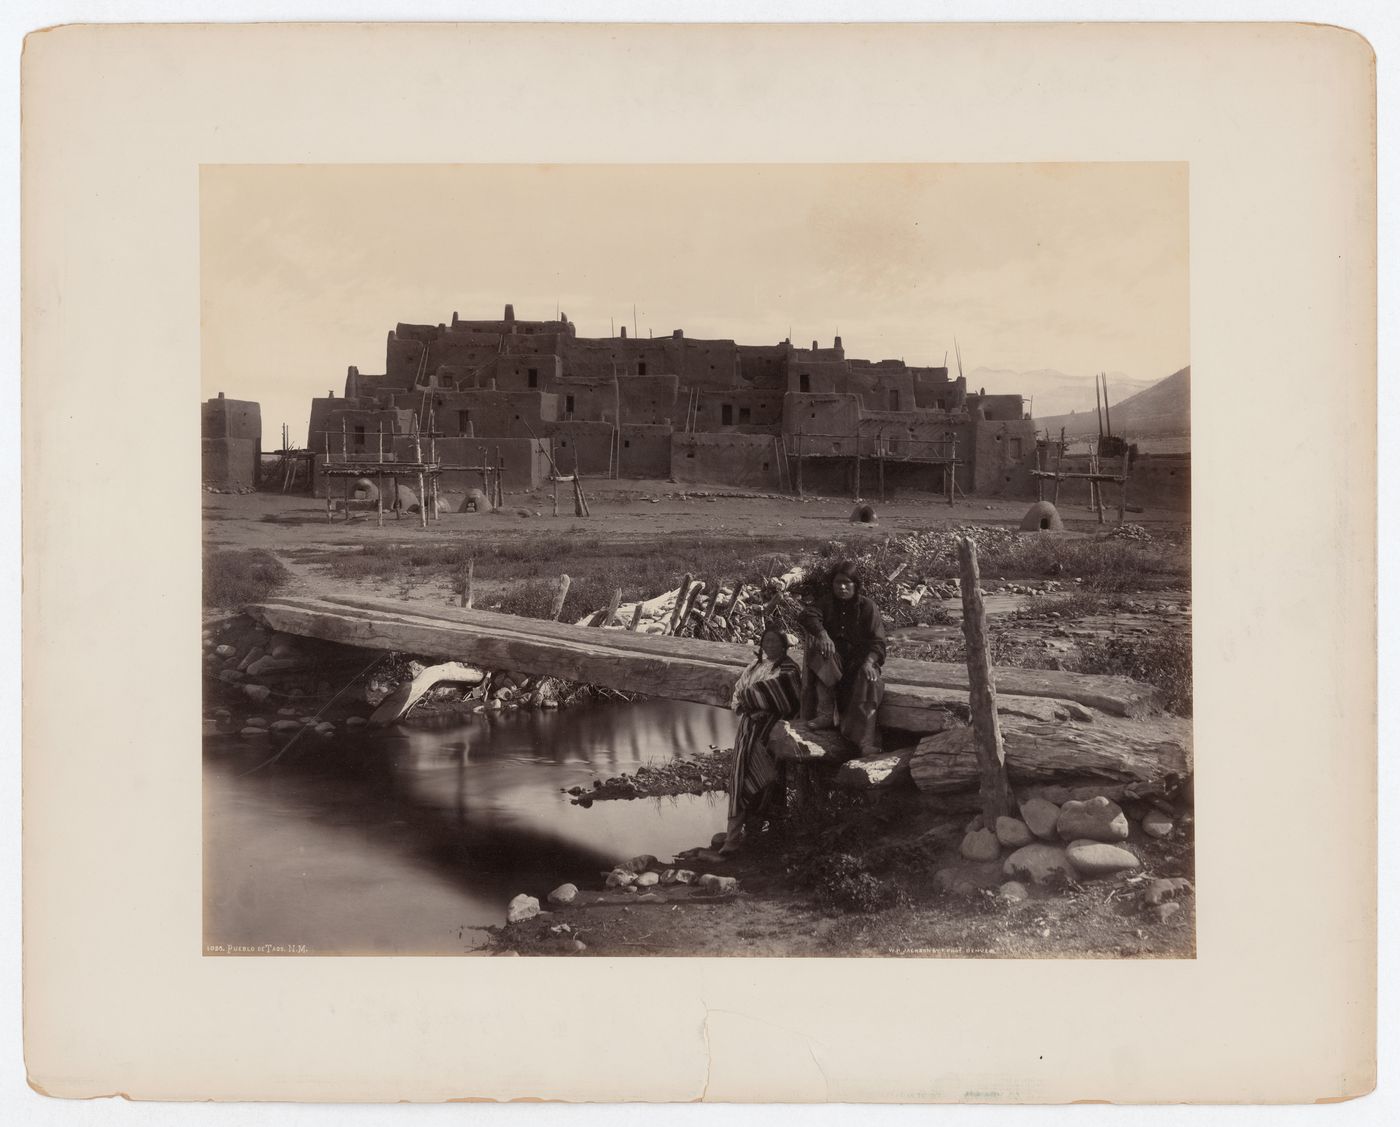 View of Taos Pueblo with two possibly Taos people in front of wooden bridge in the foreground, New Mexico, United States